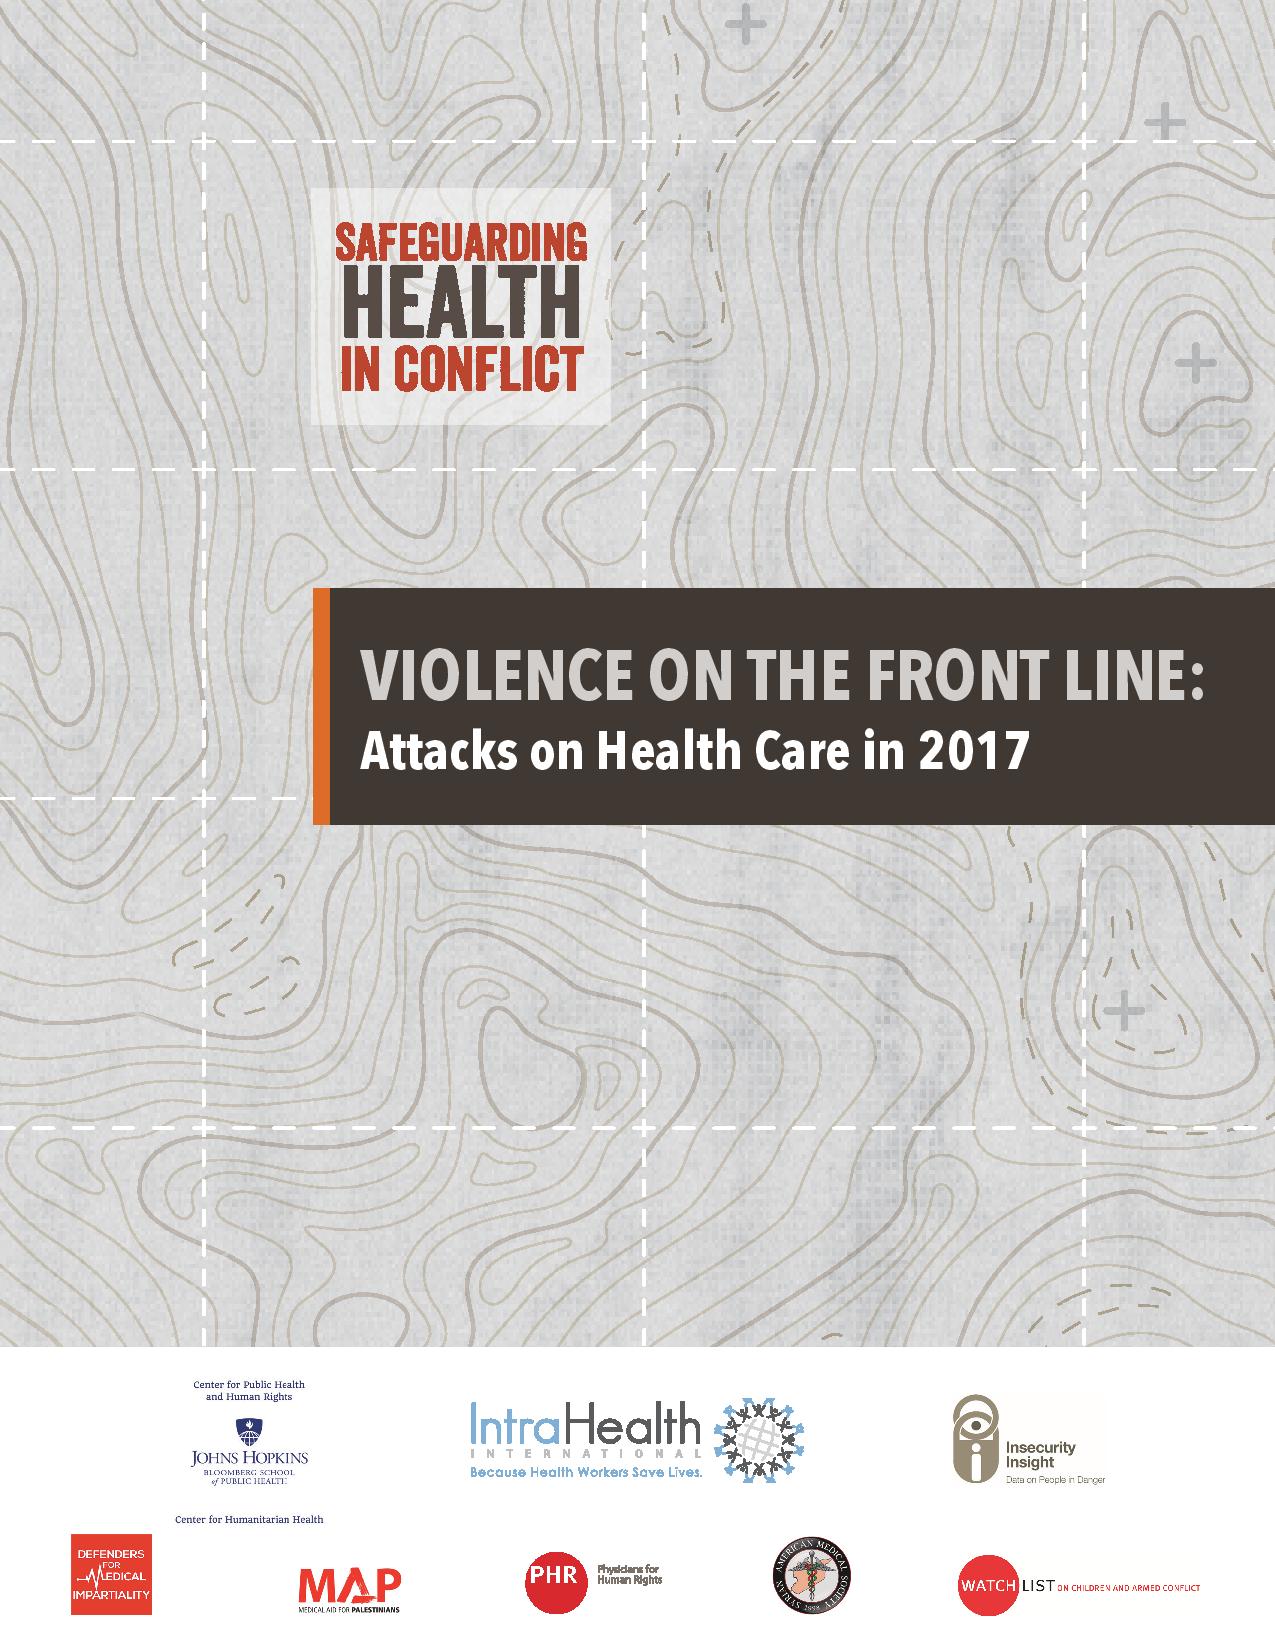 Safeguarding Health in Conflict Coalition (SHCC) 